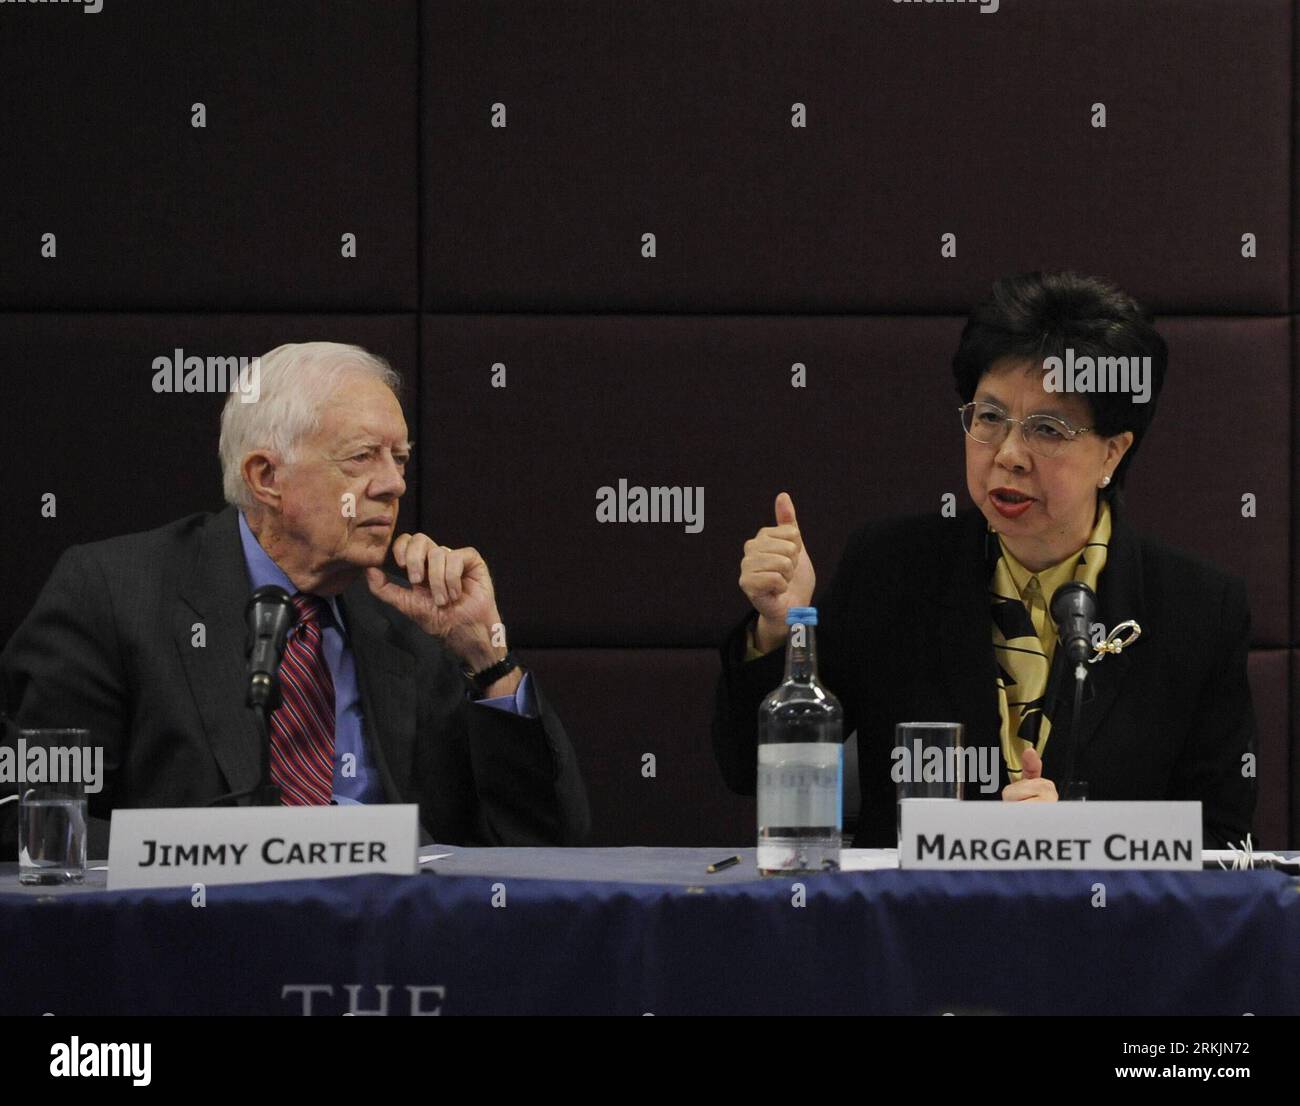 Bildnummer: 56148476  Datum: 05.10.2011  Copyright: imago/Xinhua (111005) -- LONDON, Oct. 5, 2011 (Xinhua) -- Former US President Jimmy Carter (L) and World Health Organization (WHO) Director-General Margaret Chan attend the press conference announcing the new funding campaign for the eradication of Guinea worm disease, in London Oct. 5, 2011. Together with the World Health Organization (WHO) Director-General Margaret Chan, Carter announced Wednesday in London the launching of a new major funding campaign to make the Guinea worm disease, once wide-spread in Africa and Asia, the second infectio Stock Photo